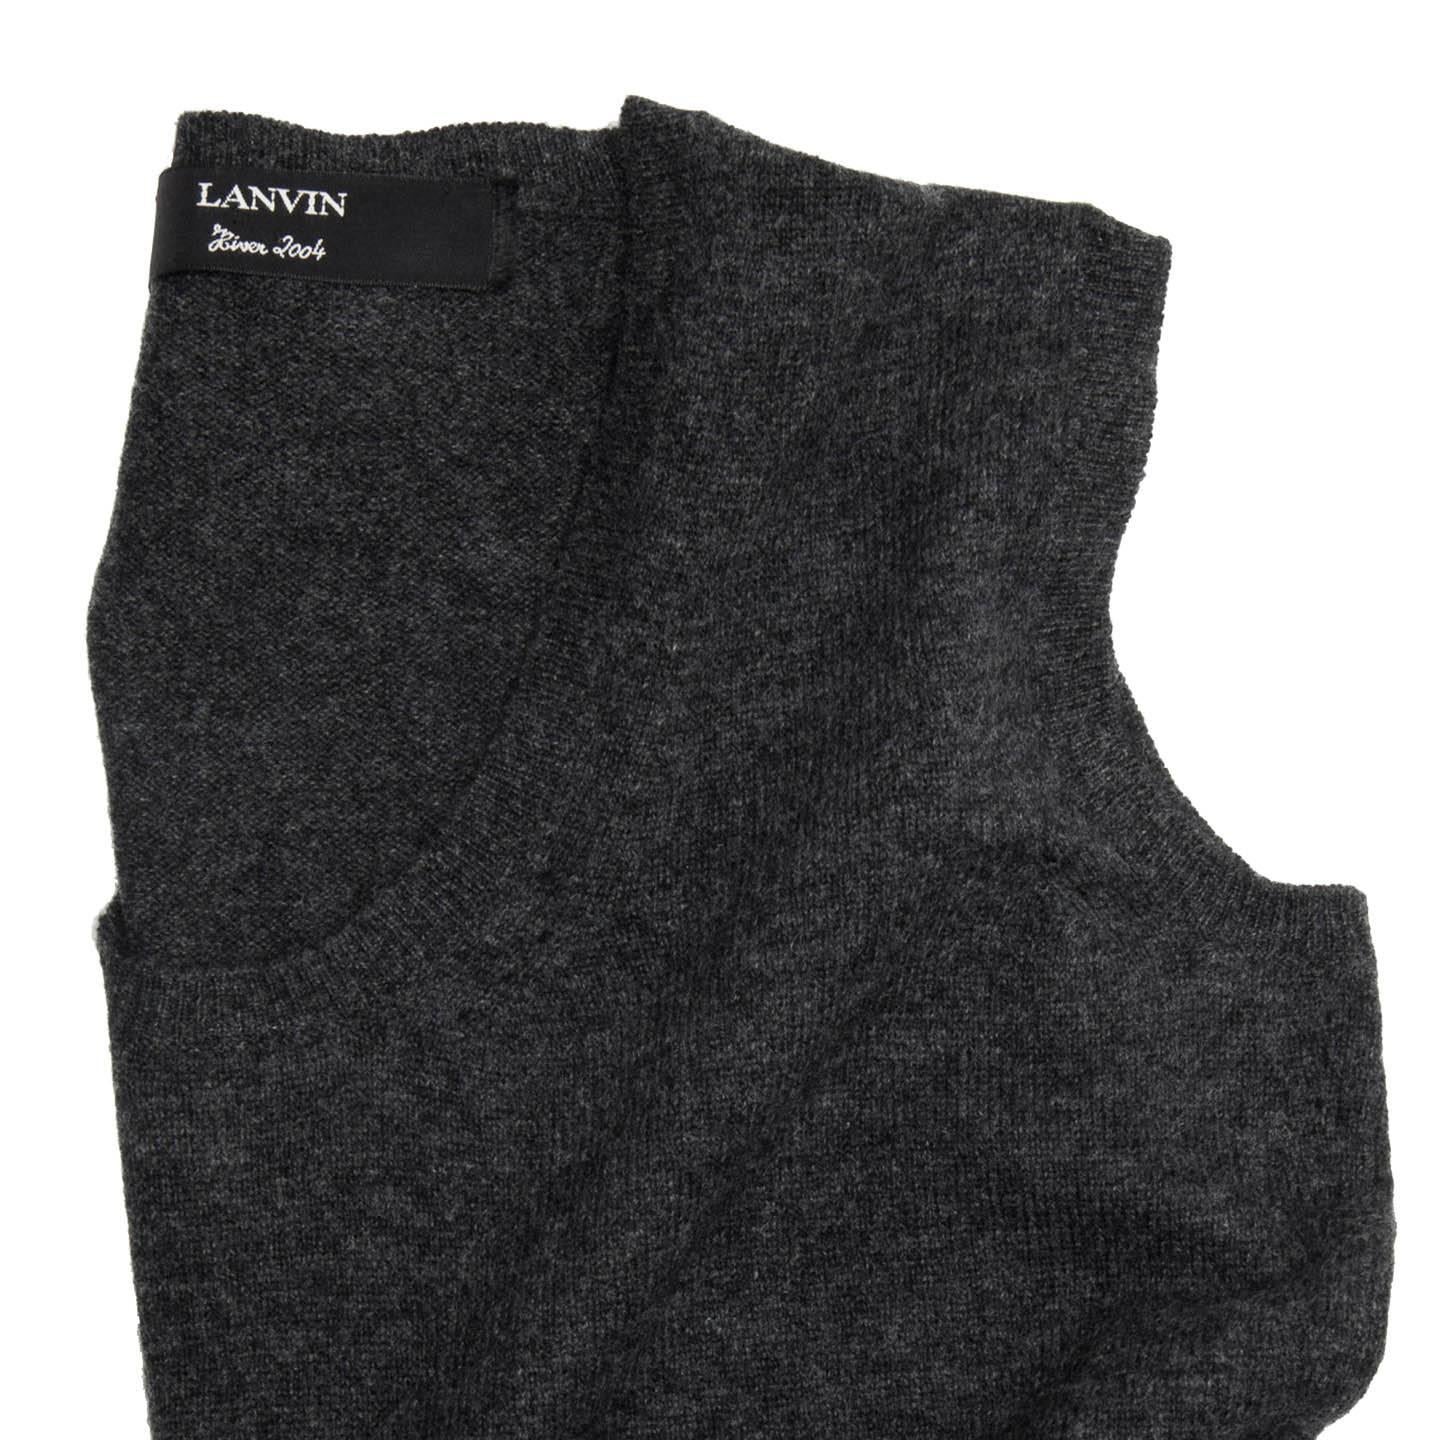 Lanvin Charcoal Grey Cashmere Vest In New Condition For Sale In Brooklyn, NY